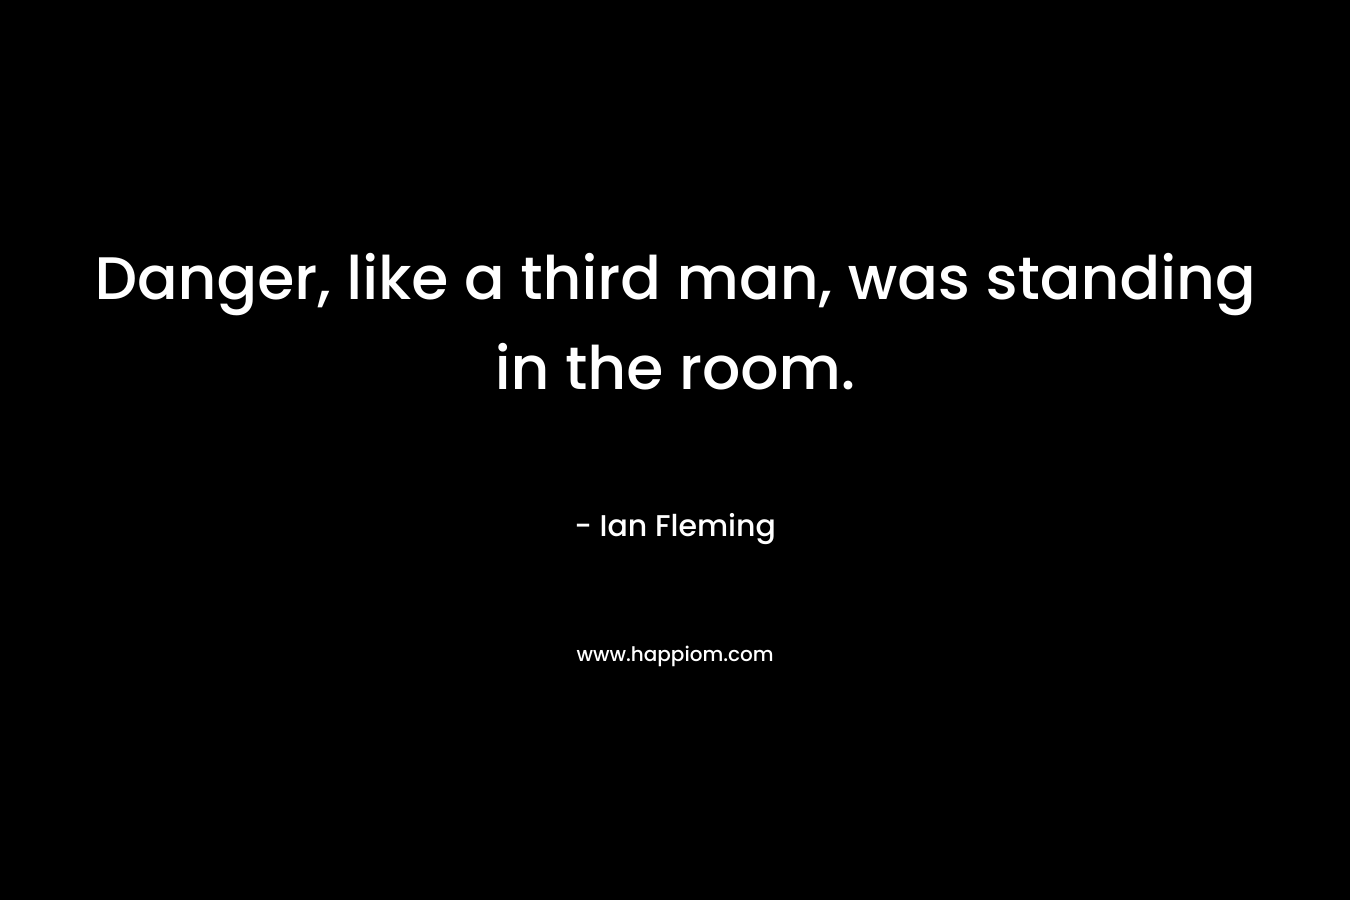 Danger, like a third man, was standing in the room. – Ian Fleming